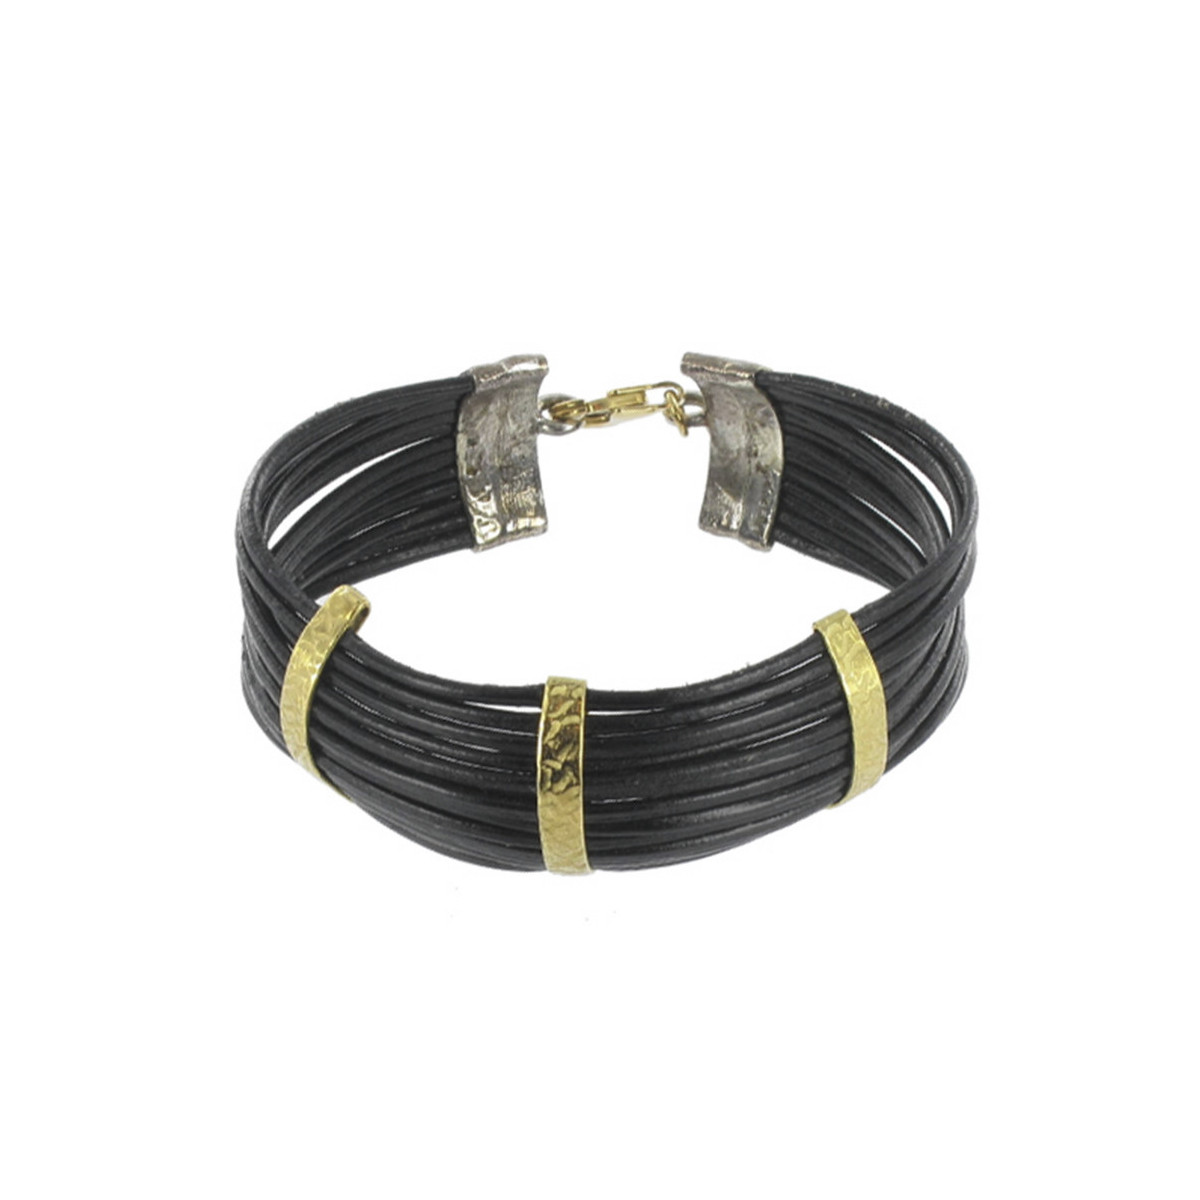 GOLD AND SILVER LEATHER BRACELET